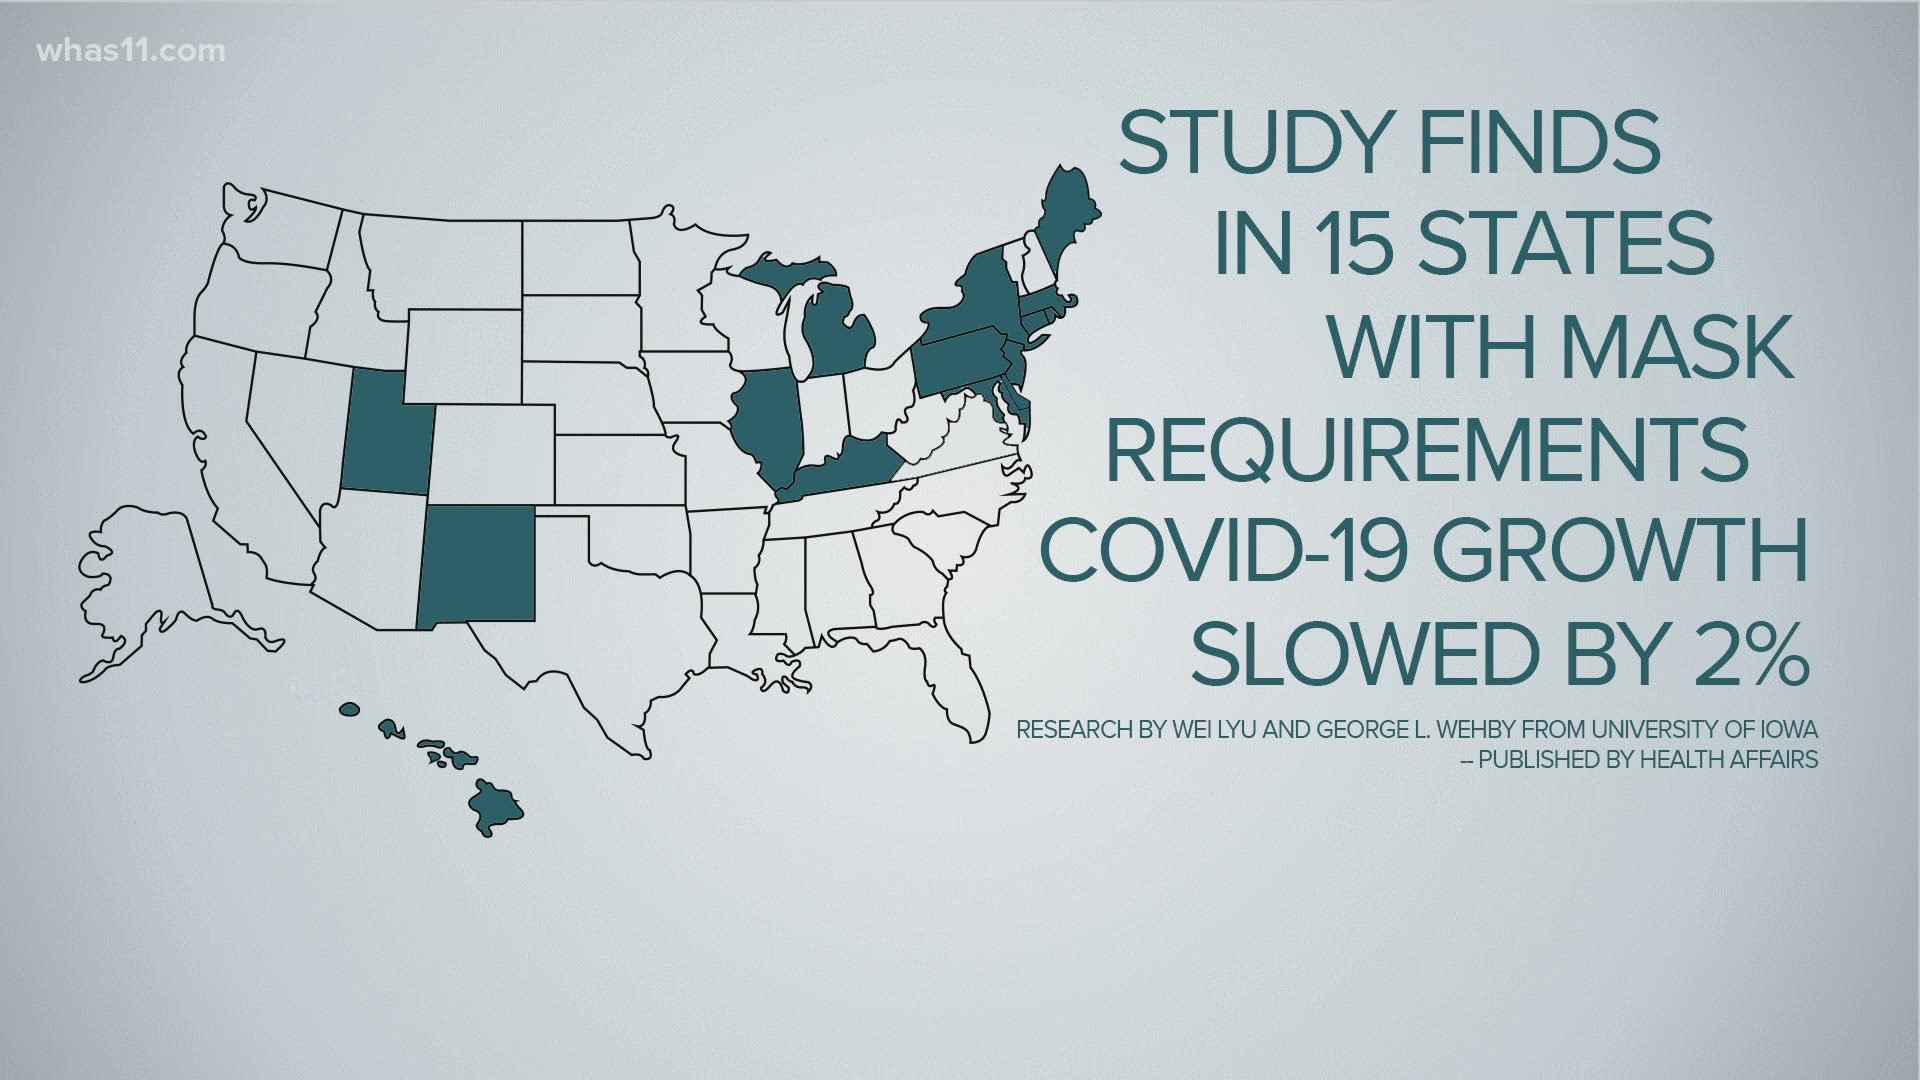 A recent study published by Health Affairs looked at 15 states and compared the COVID-19 growth rate before and after mask-requirements were put in place.